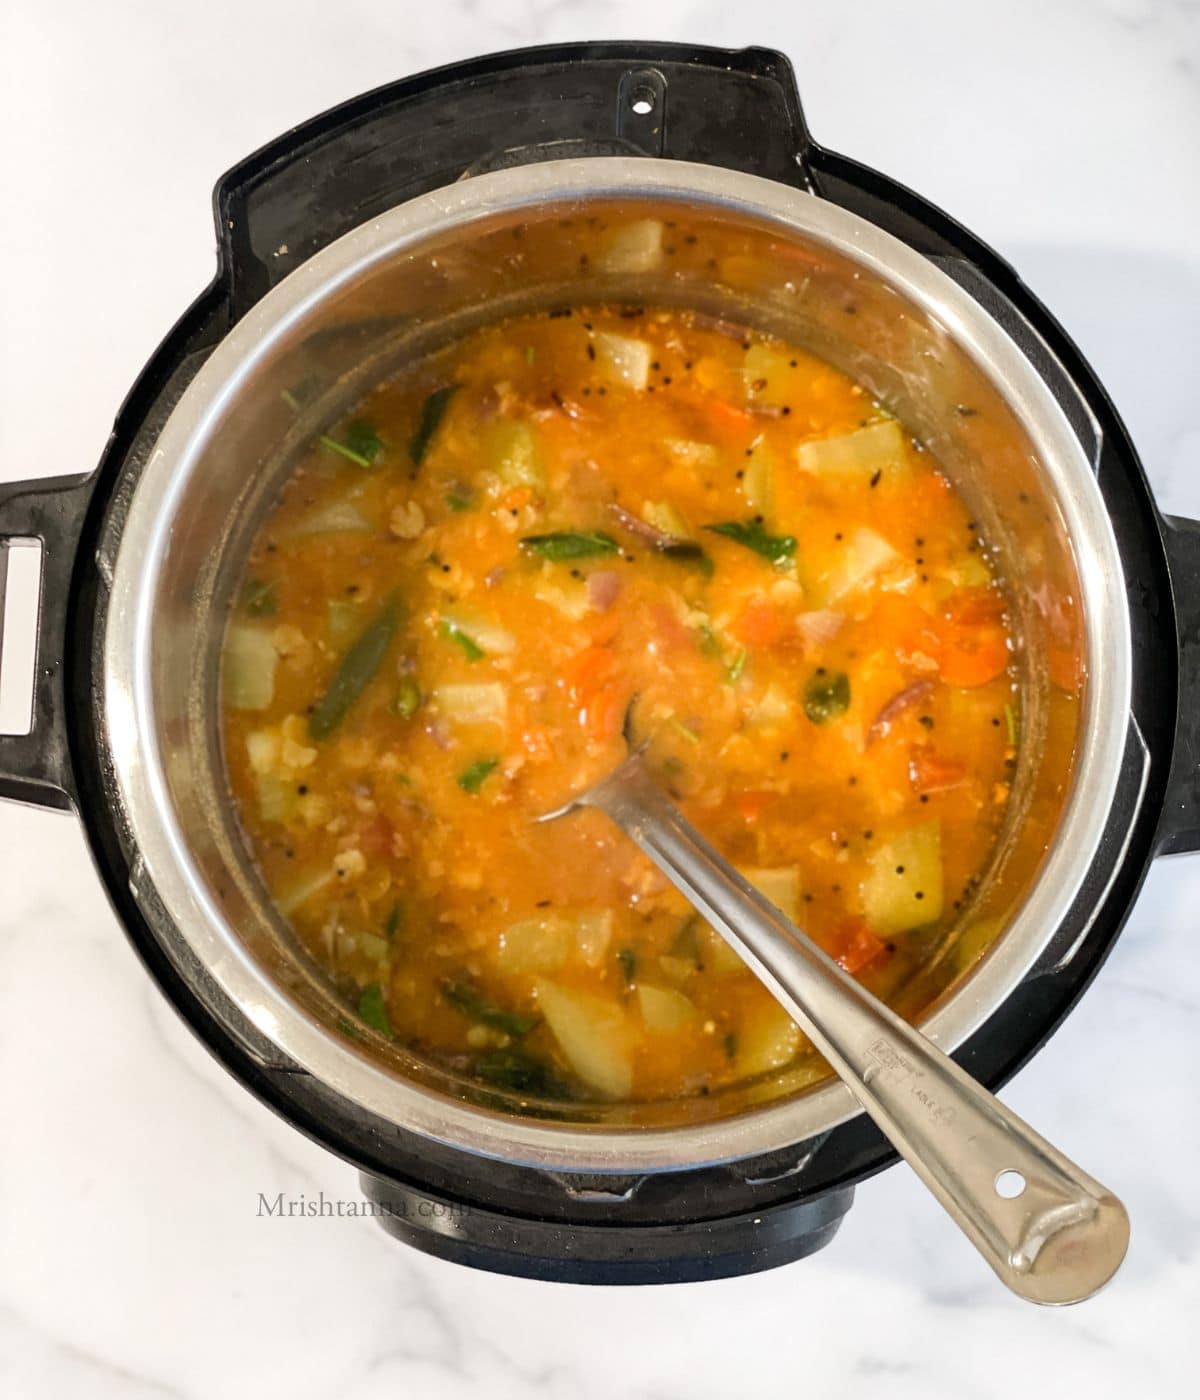 An instant pot is with vegetable sambar and a steel ladle is inserted.